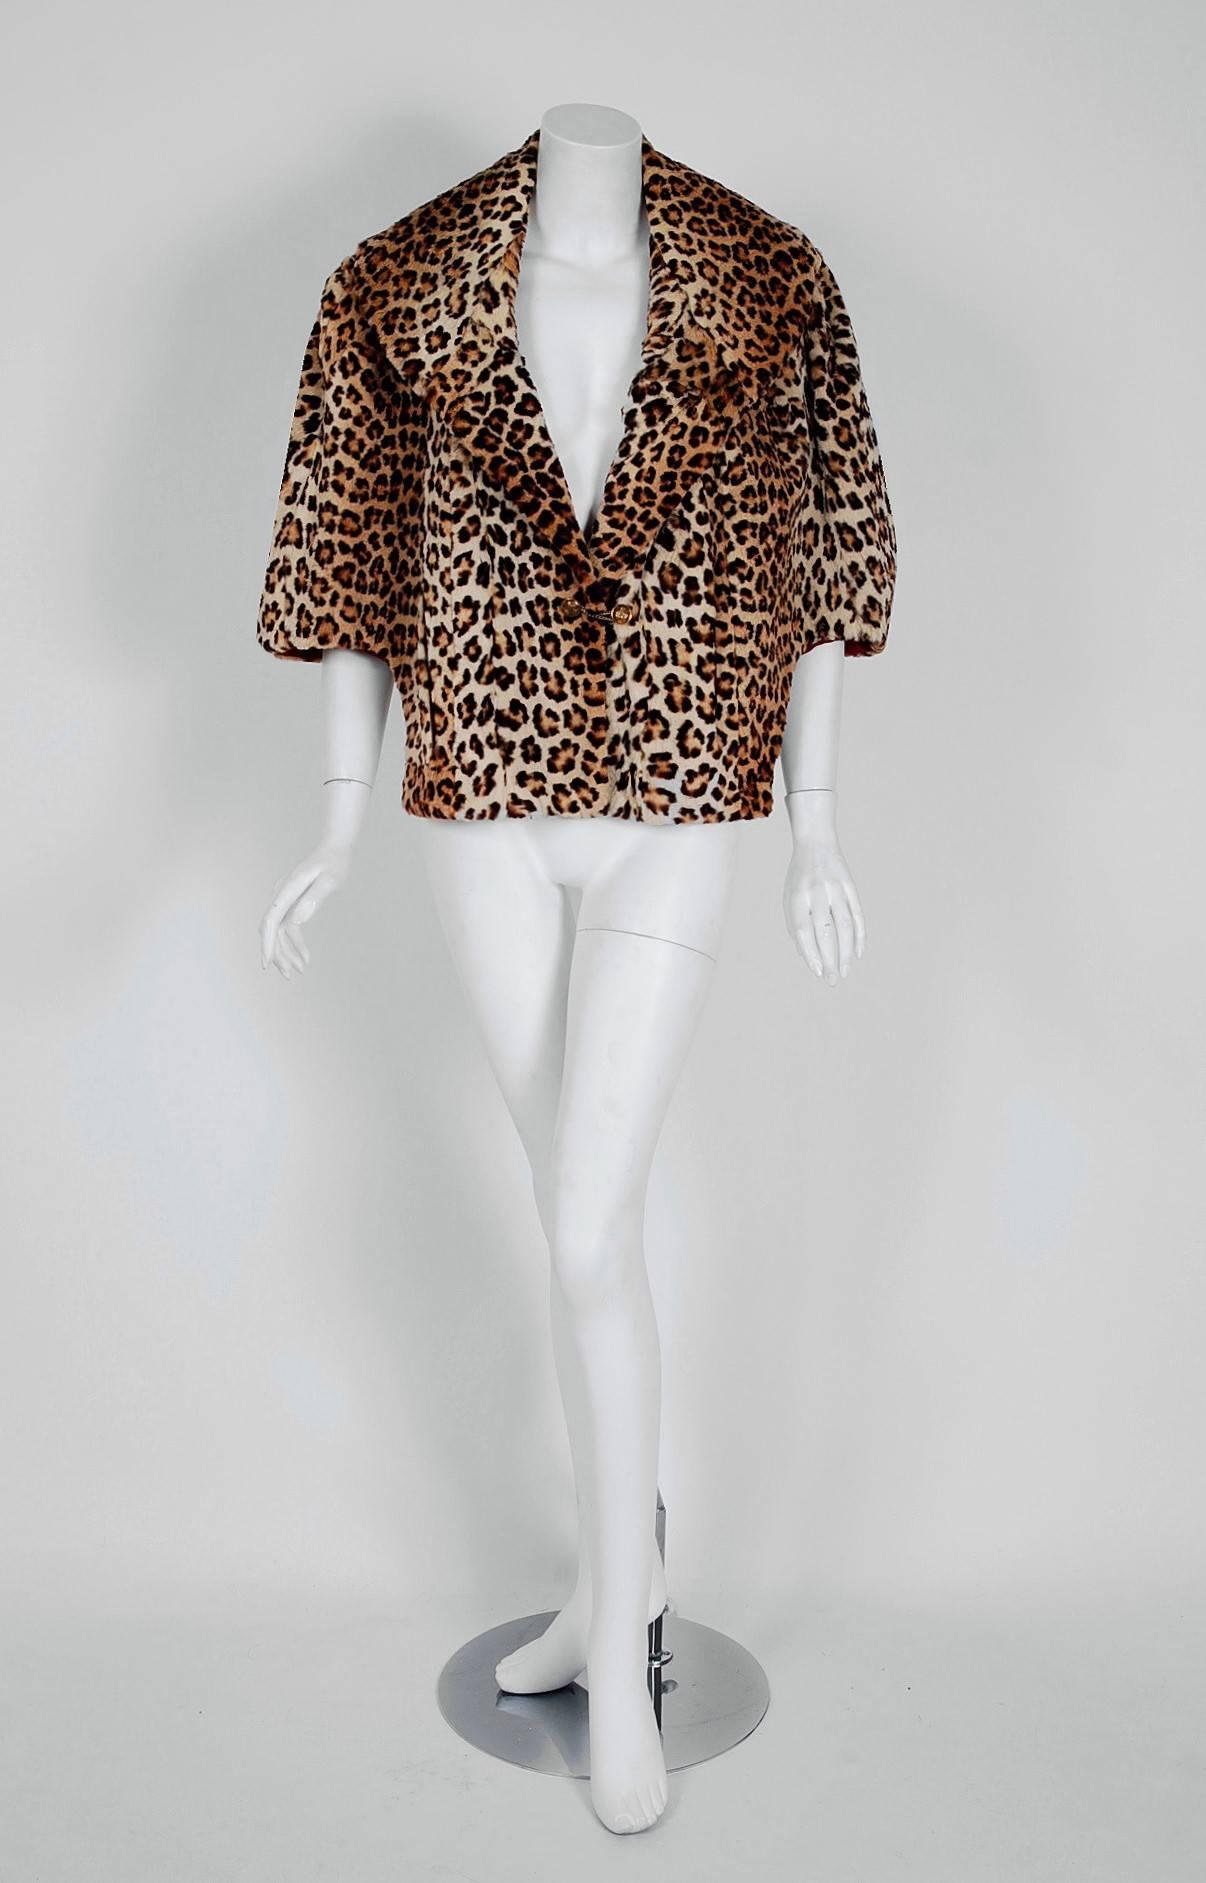 This exquisite early 1950's genuine leopard-print mouton fur cape by New York designer "I.R Fox" will make any woman shine during the upcoming cold winter months. The soft fur has been dyed to resemble a perfect leopard pattern and the